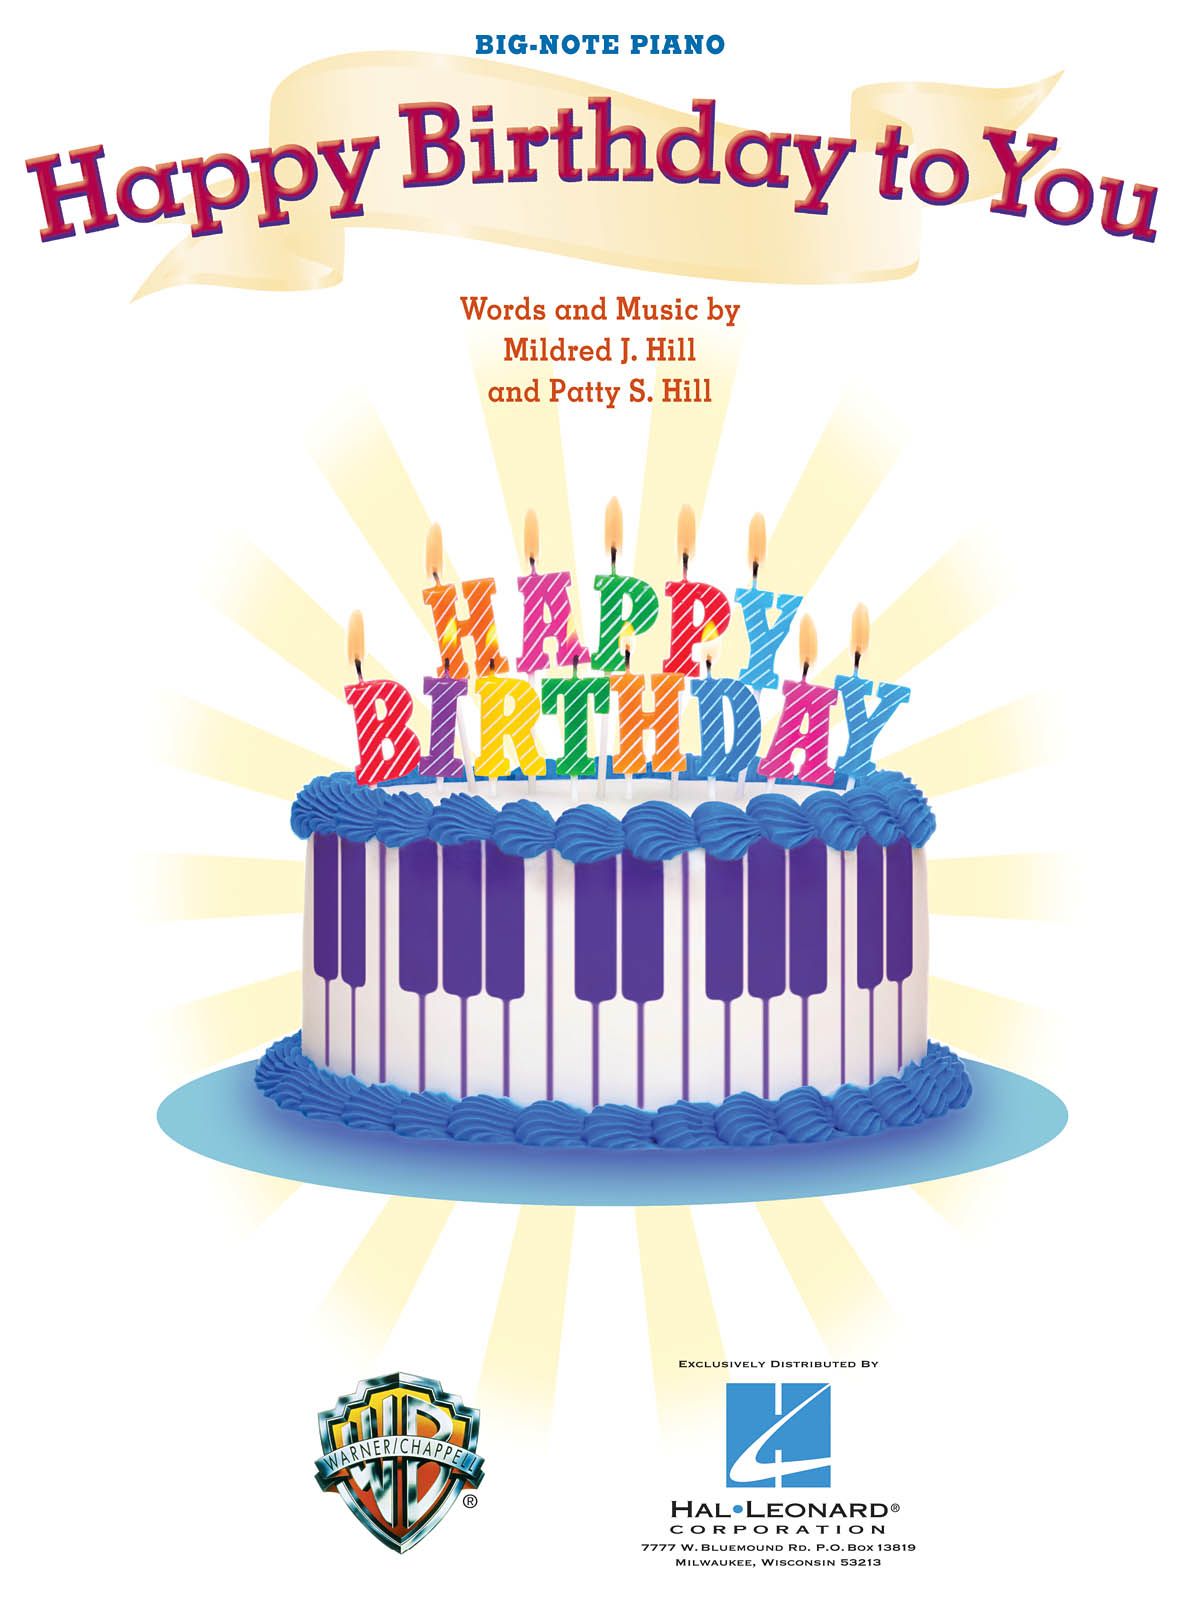 Happy Birthday To You (Big-Note Piano) by Mildred J. Hill » all